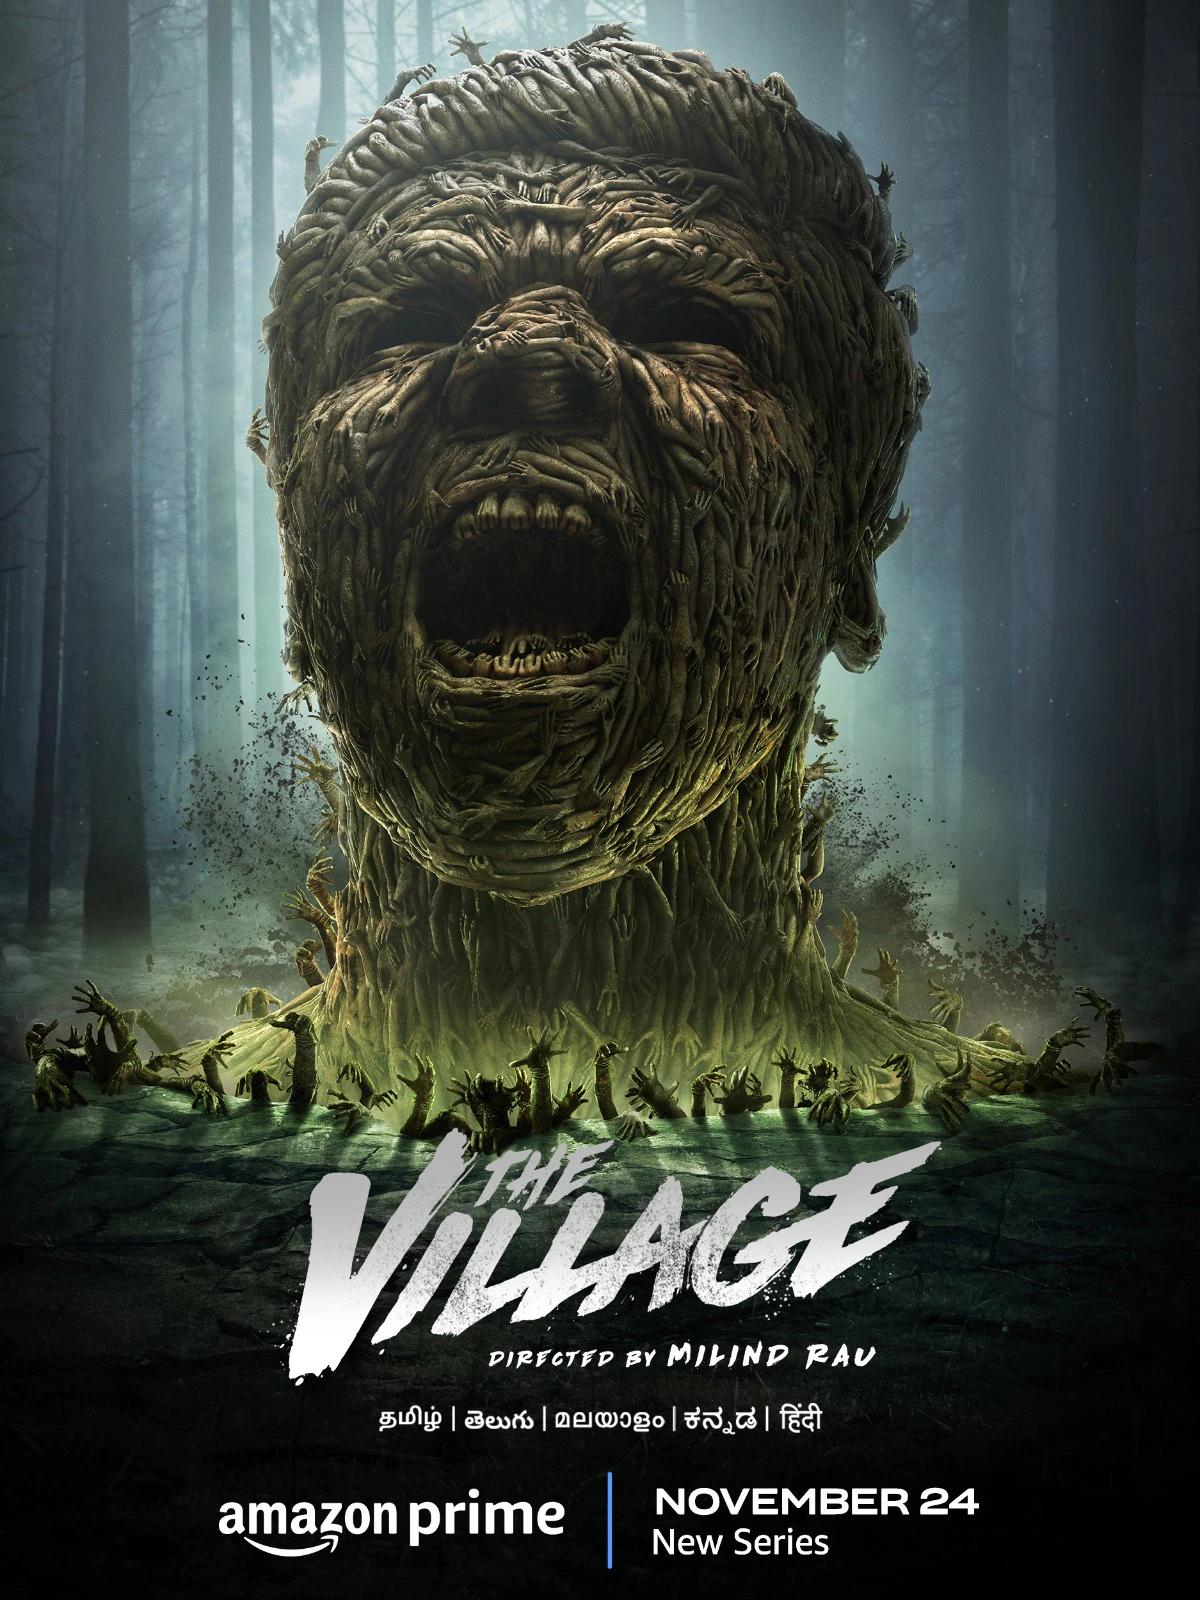 The Village (November 24) - Streaming on Prime VideoThe Village unfolds a gripping adaptation of the graphic horror novel set against Tamil Nadu’s remote landscapes. It follows a man stranded in a cursed village, desperately searching for his family, while a ruthless heir of a pharmaceutical empire dispatches mercenaries to recover a mysterious, long-forgotten entity, converging their paths in a night filled with terror.